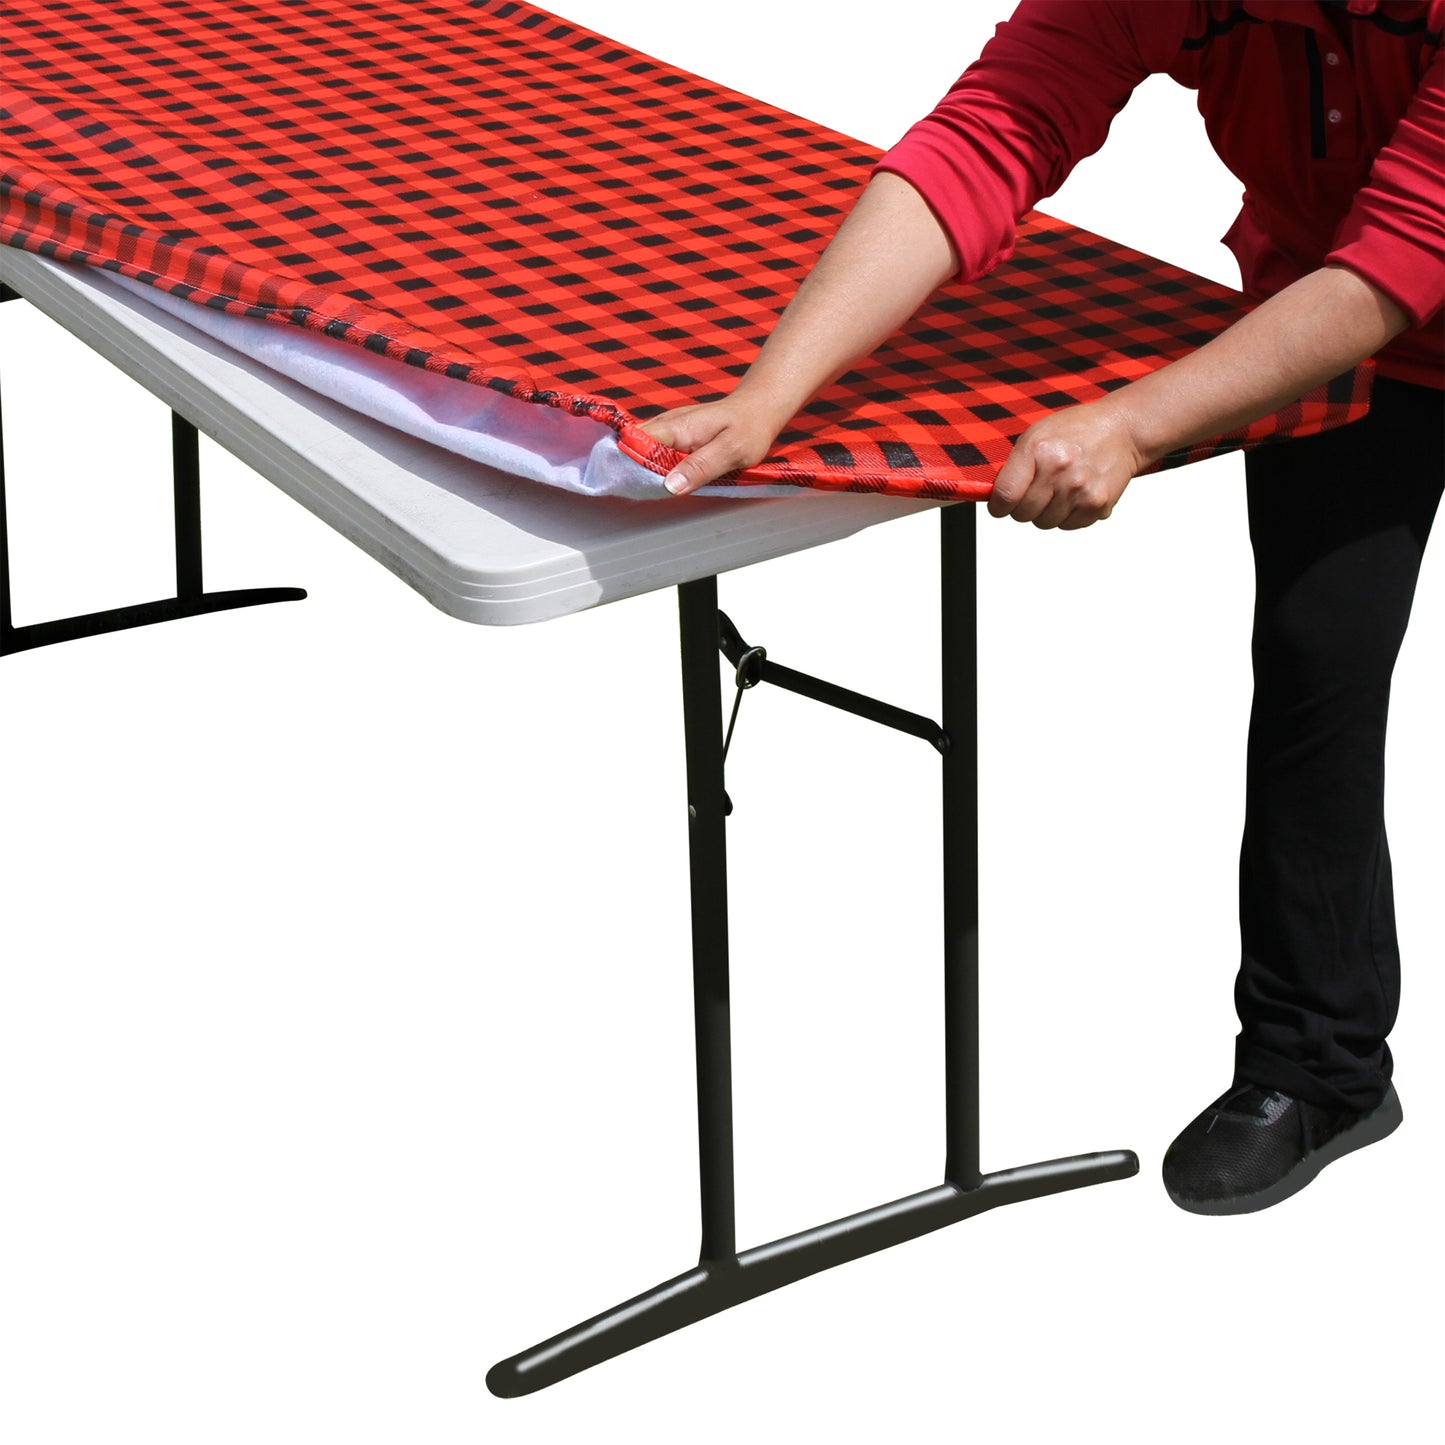 TableCloth PLUS 96" Checkerboard Black and Red Fitted PEVA Vinyl Tablecloth for 8' Folding Tables Product Image